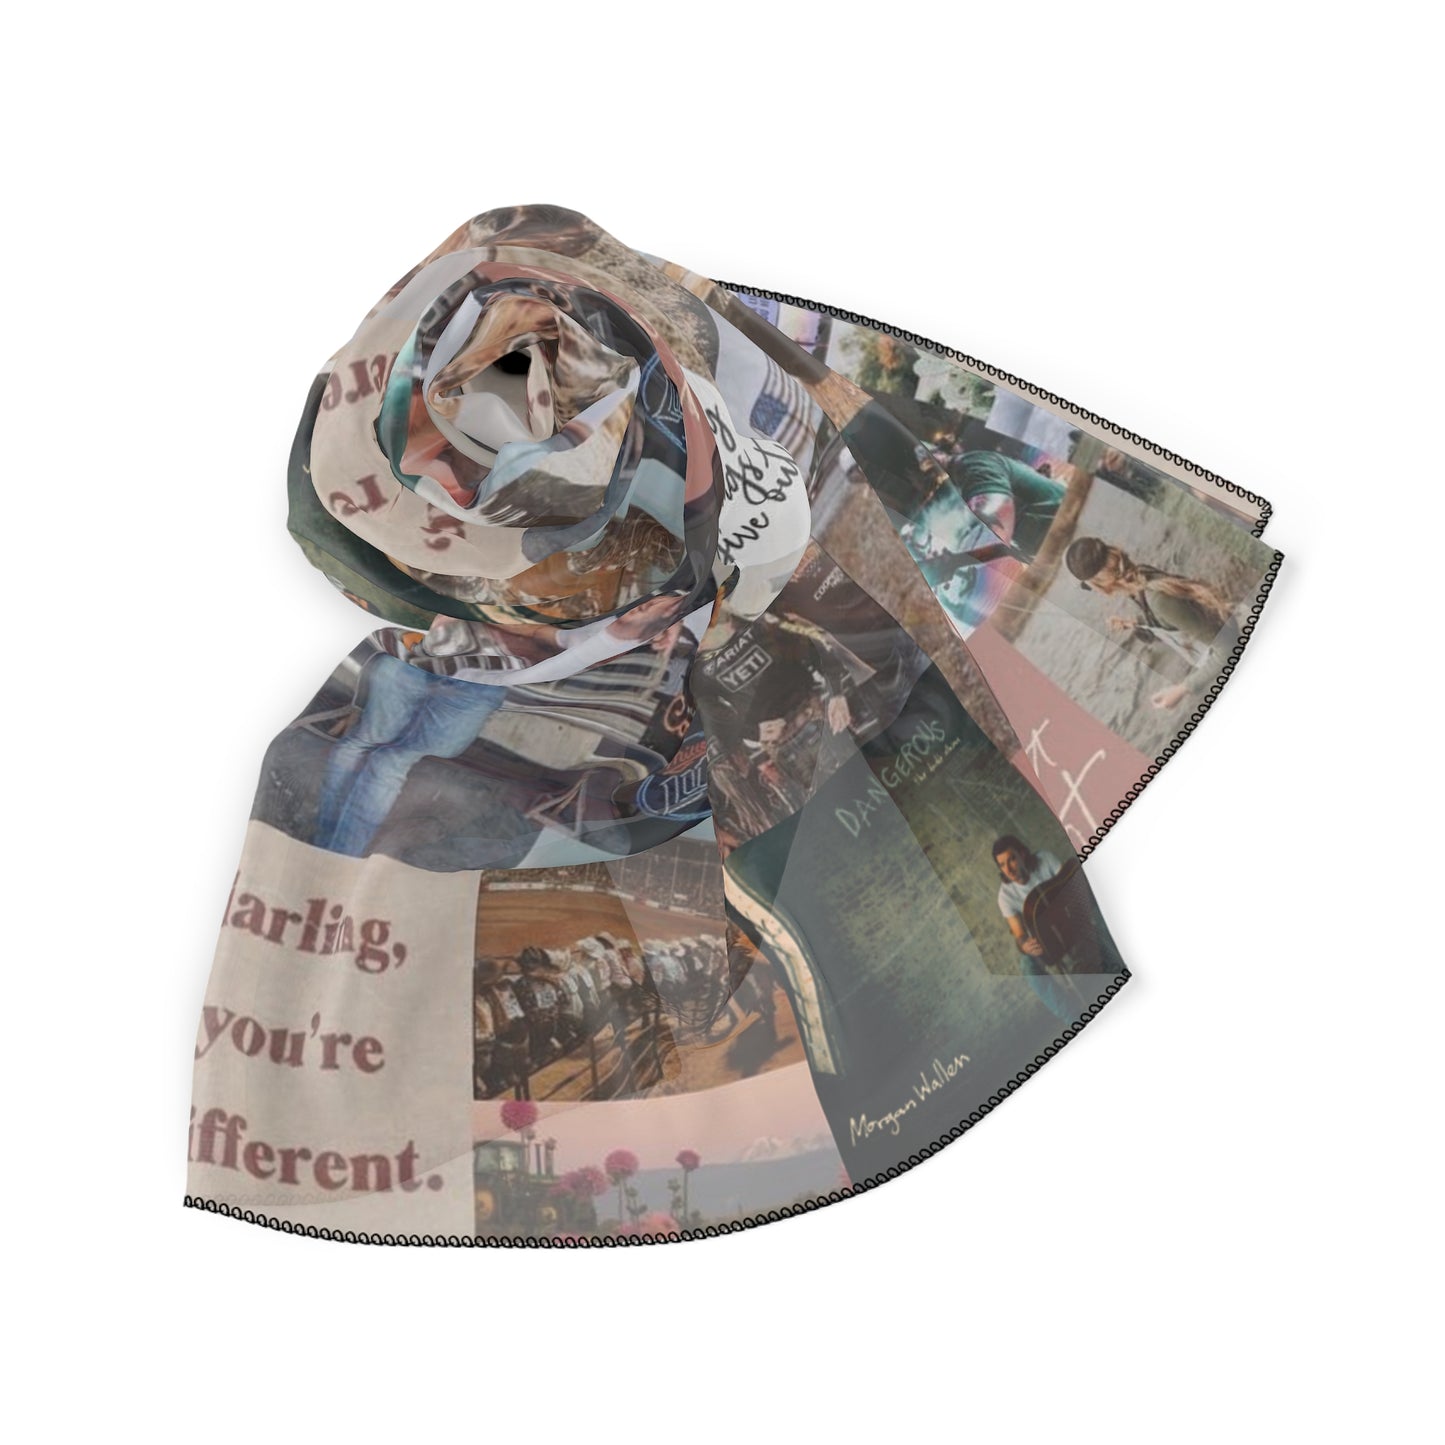 Morgan Wallen Darling You're Different Collage Polyester Scarf